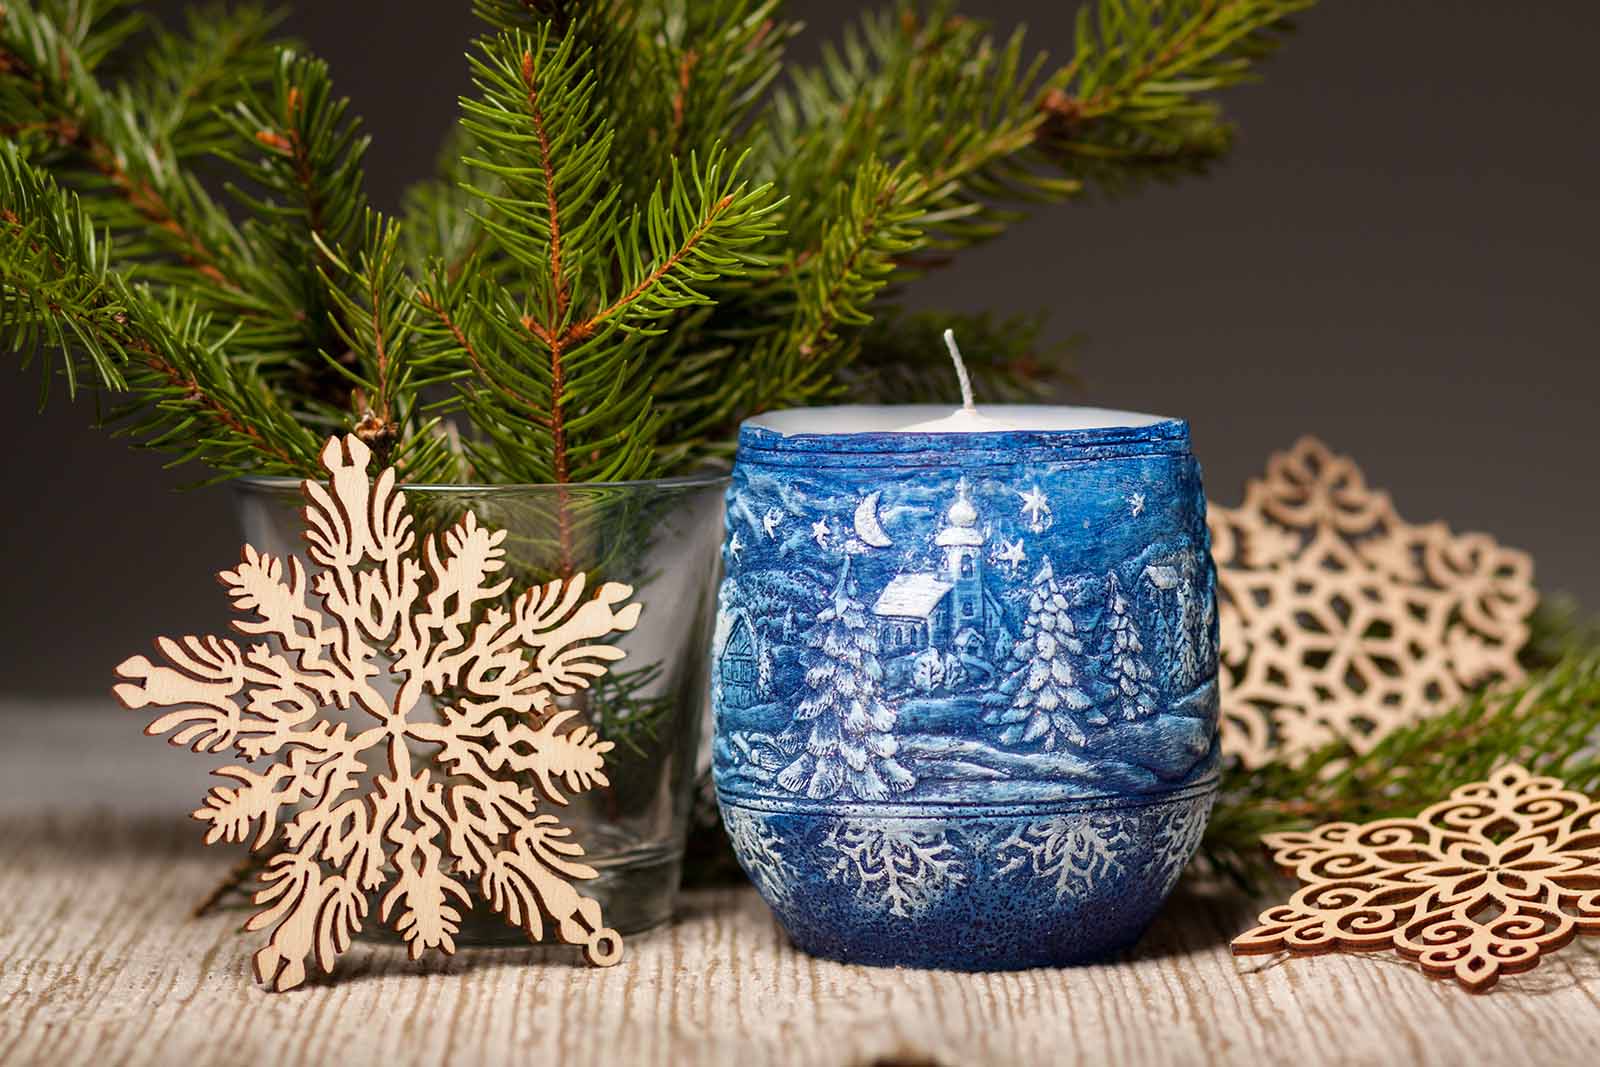 Blue Christmas themed scented candle beside glass vase with pine leaves and snowflake decorations 